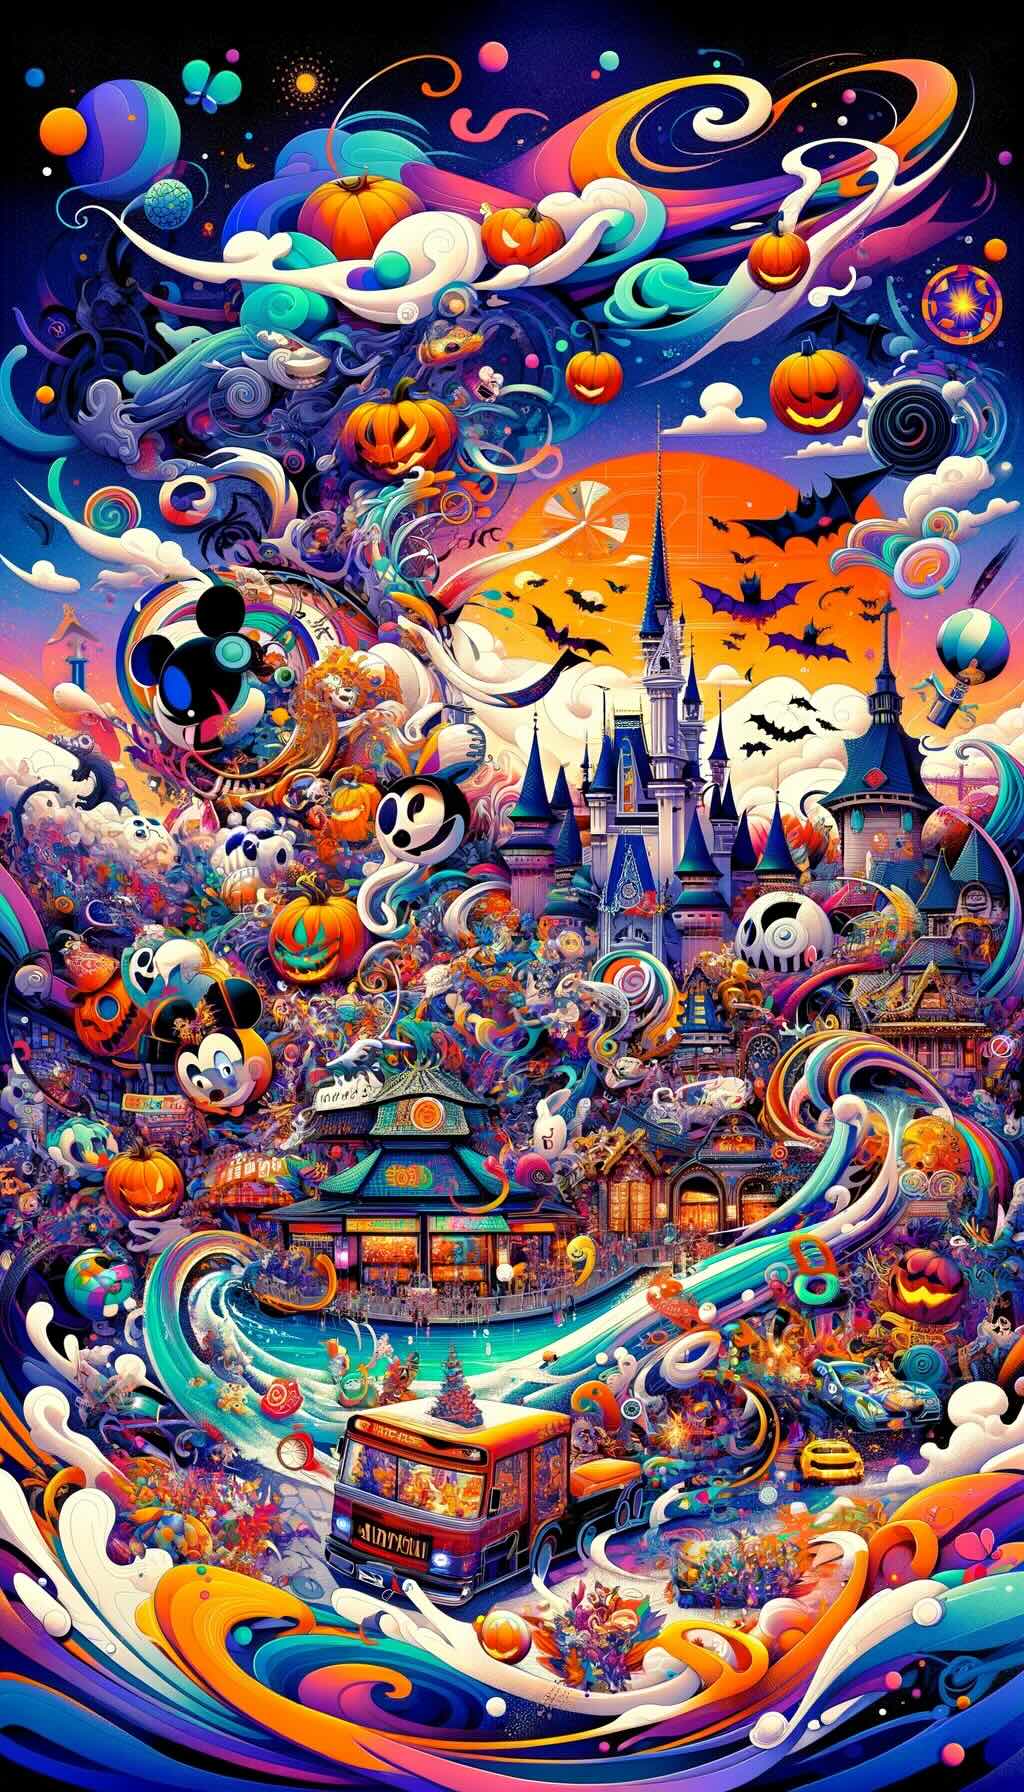 Essence of notable seasonal festivals across various theme parks in Japan. It depicts the vibrant celebrations and unique themes from Tokyo Disneyland and DisneySea's Tanabata Days, Universal Studios Japan's Cool Japan event, Fuji-Q Highland's spooky Halloween, and Harmonyland's cute seasonal events. It incorporates elements that symbolize the festive atmosphere, cultural traditions, and the blend of excitement and enchantment these festivals bring to the parks. A dynamic array of colors, symbolic motifs, and imaginative compositions convey the diverse and lively spirit of these events. 